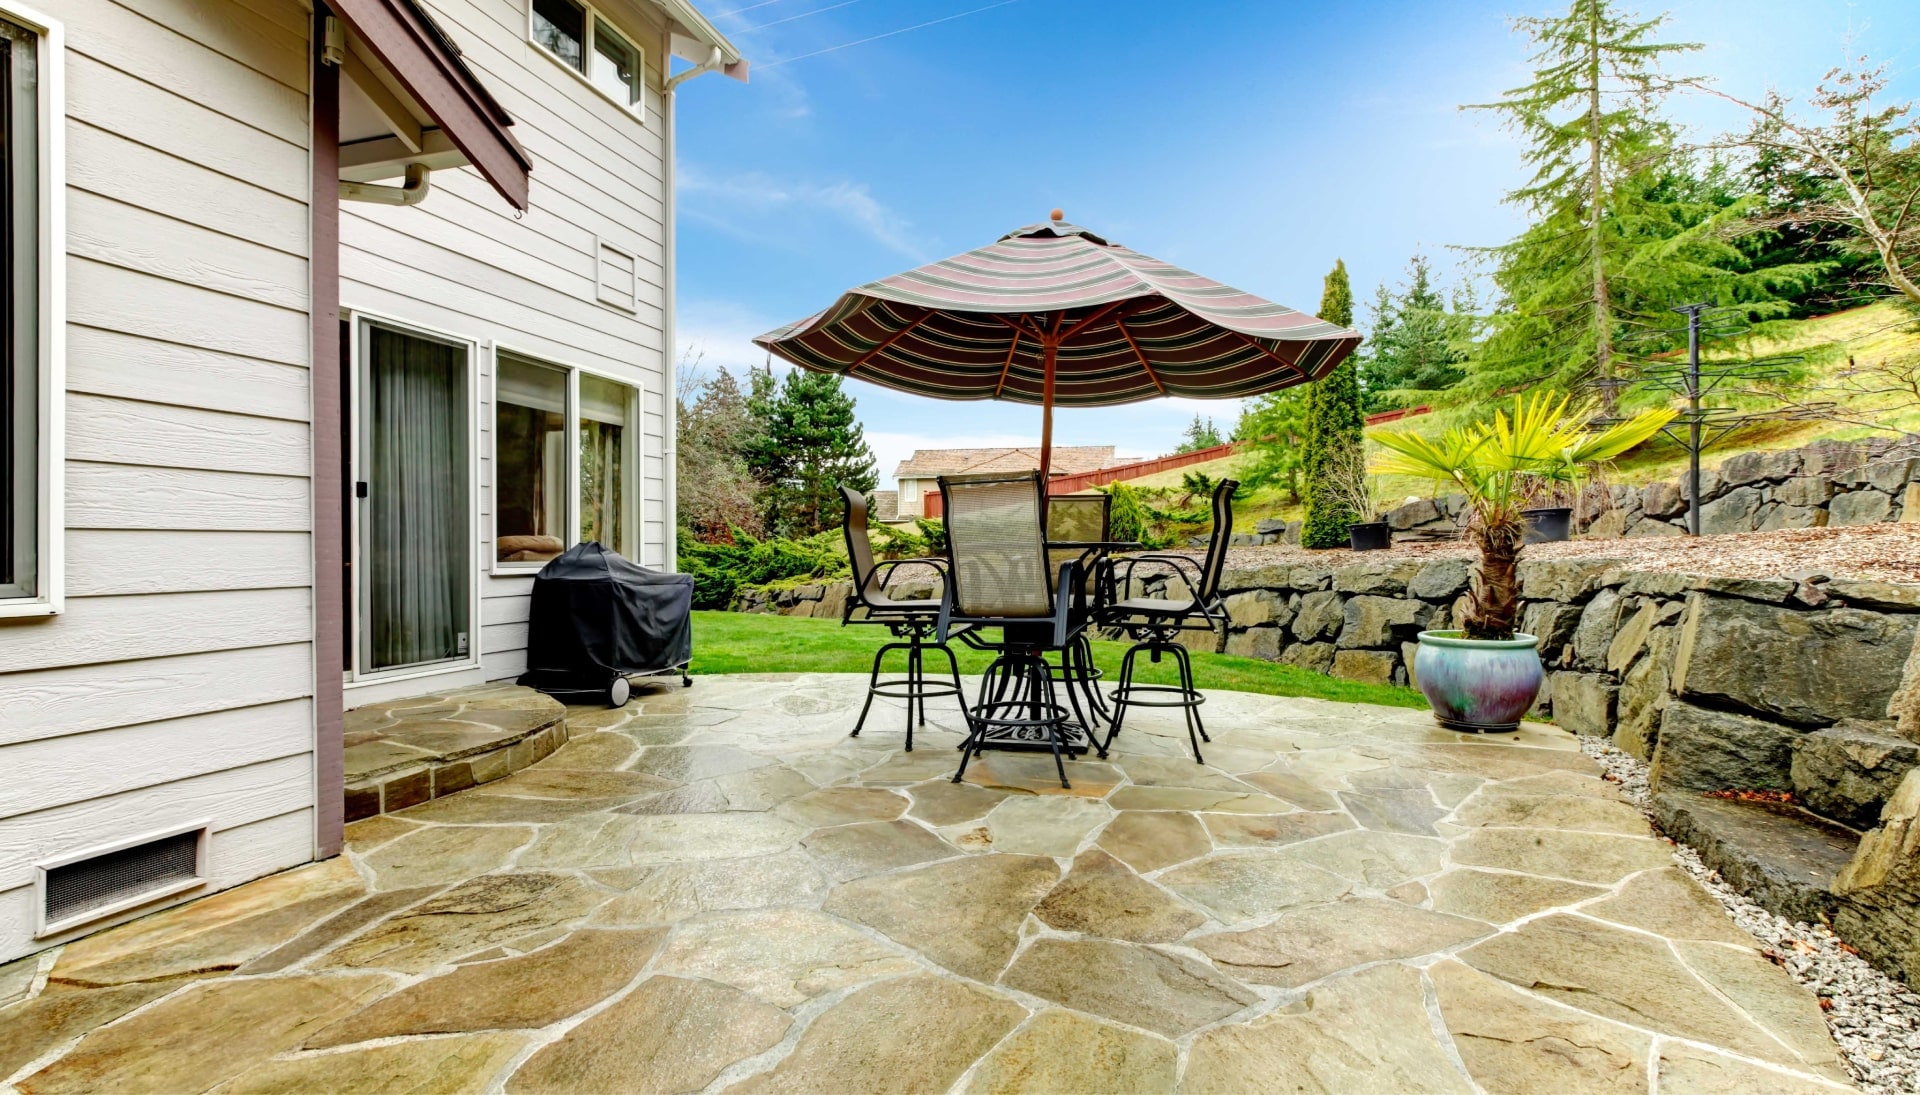 Beautifully Textured and Patterned Concrete Patios in Syracuse, New York area!